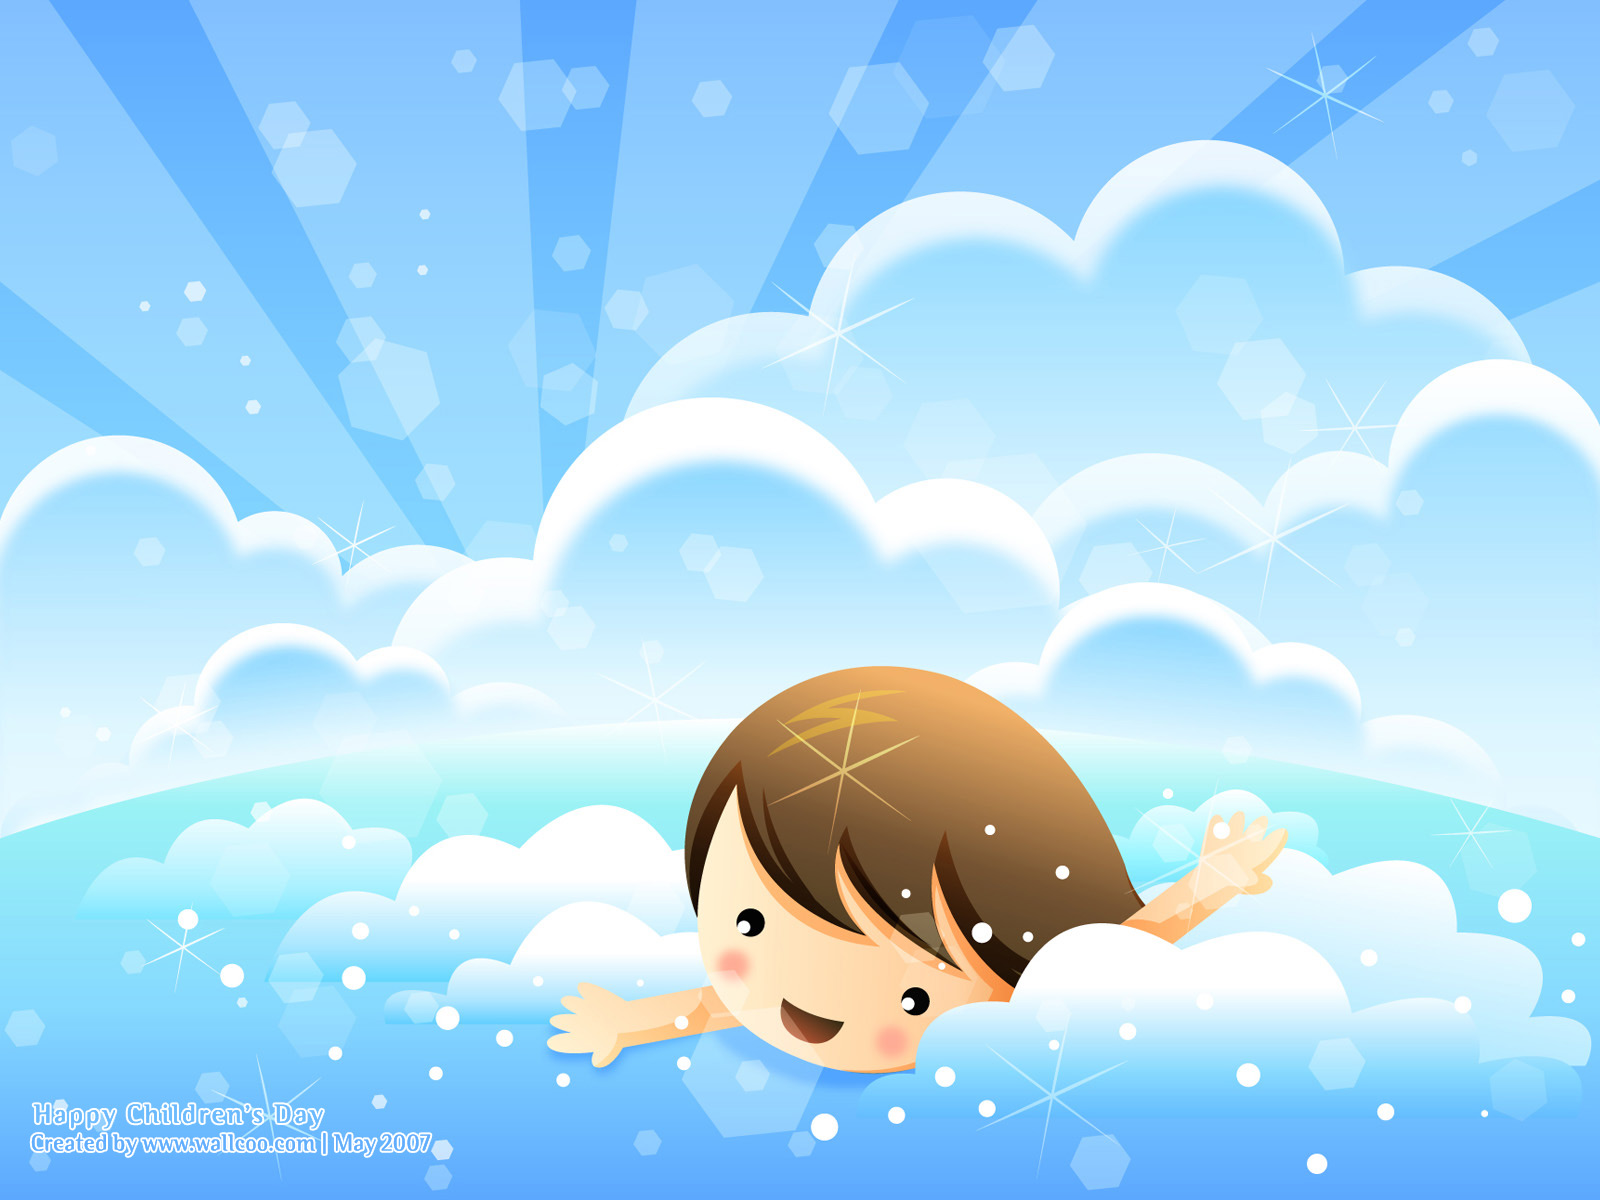 Colourful Illustrations For Children S Day No Wallpaper